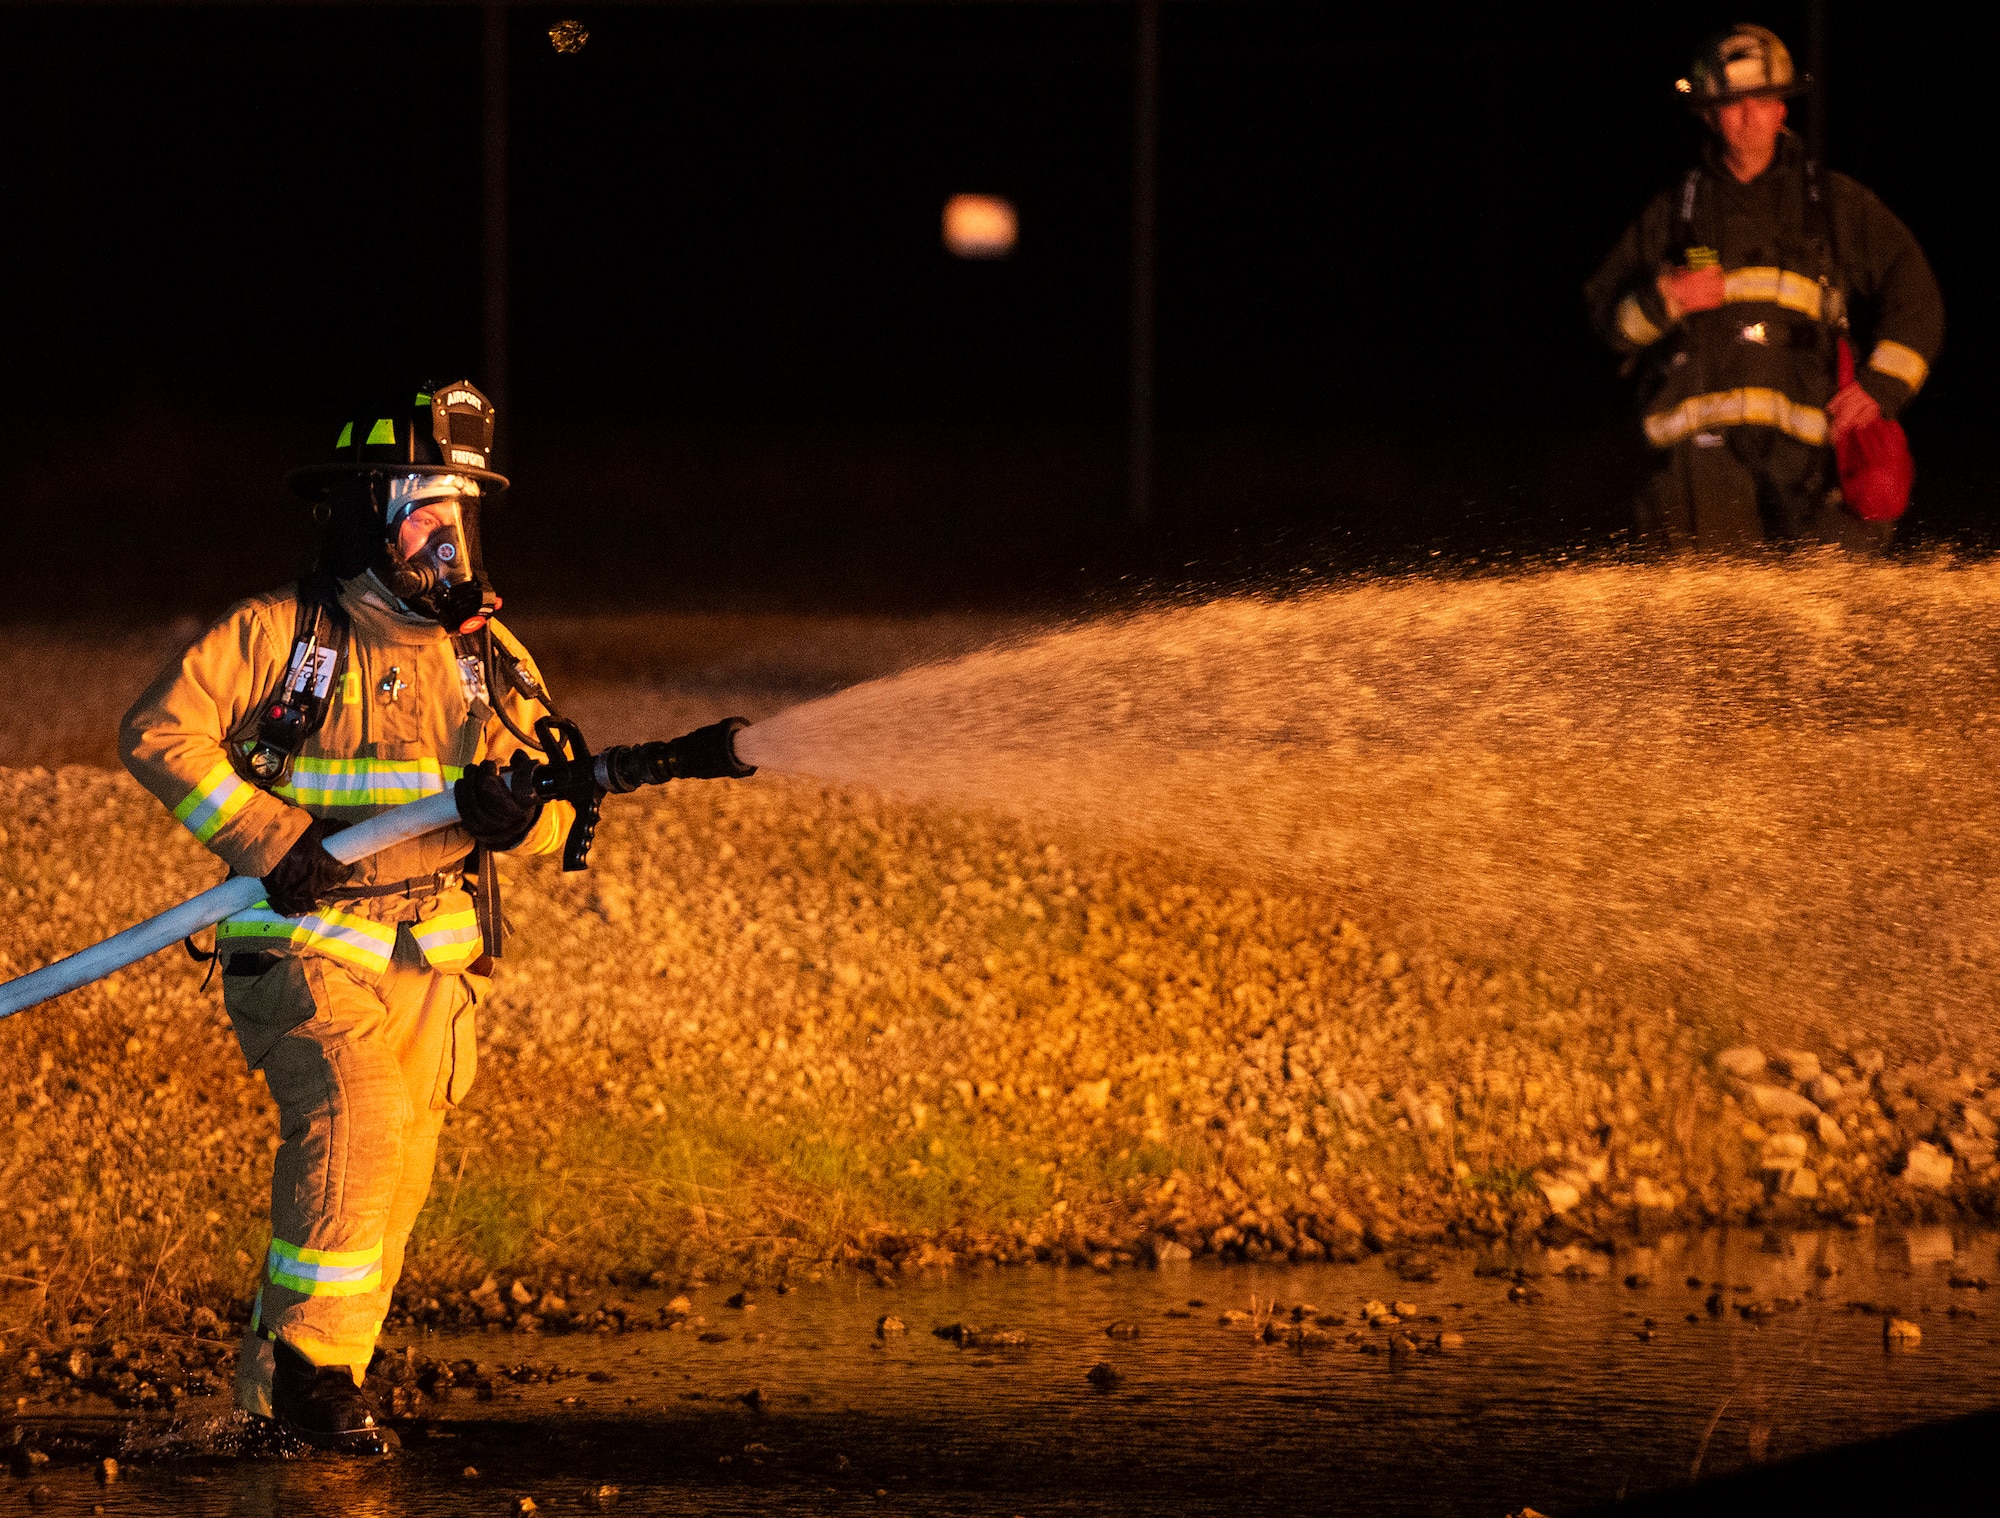 A Dayton International Airport firefighter operates a hose line against flames around an aircraft fuselage mock-up Oct. 5, 2021, at Wright-Patterson Air Force Base, Ohio. A 788th Civil Engineer Squadron firefighter monitors the training in the background. (U.S. Air Force photo by R.J. Oriez)